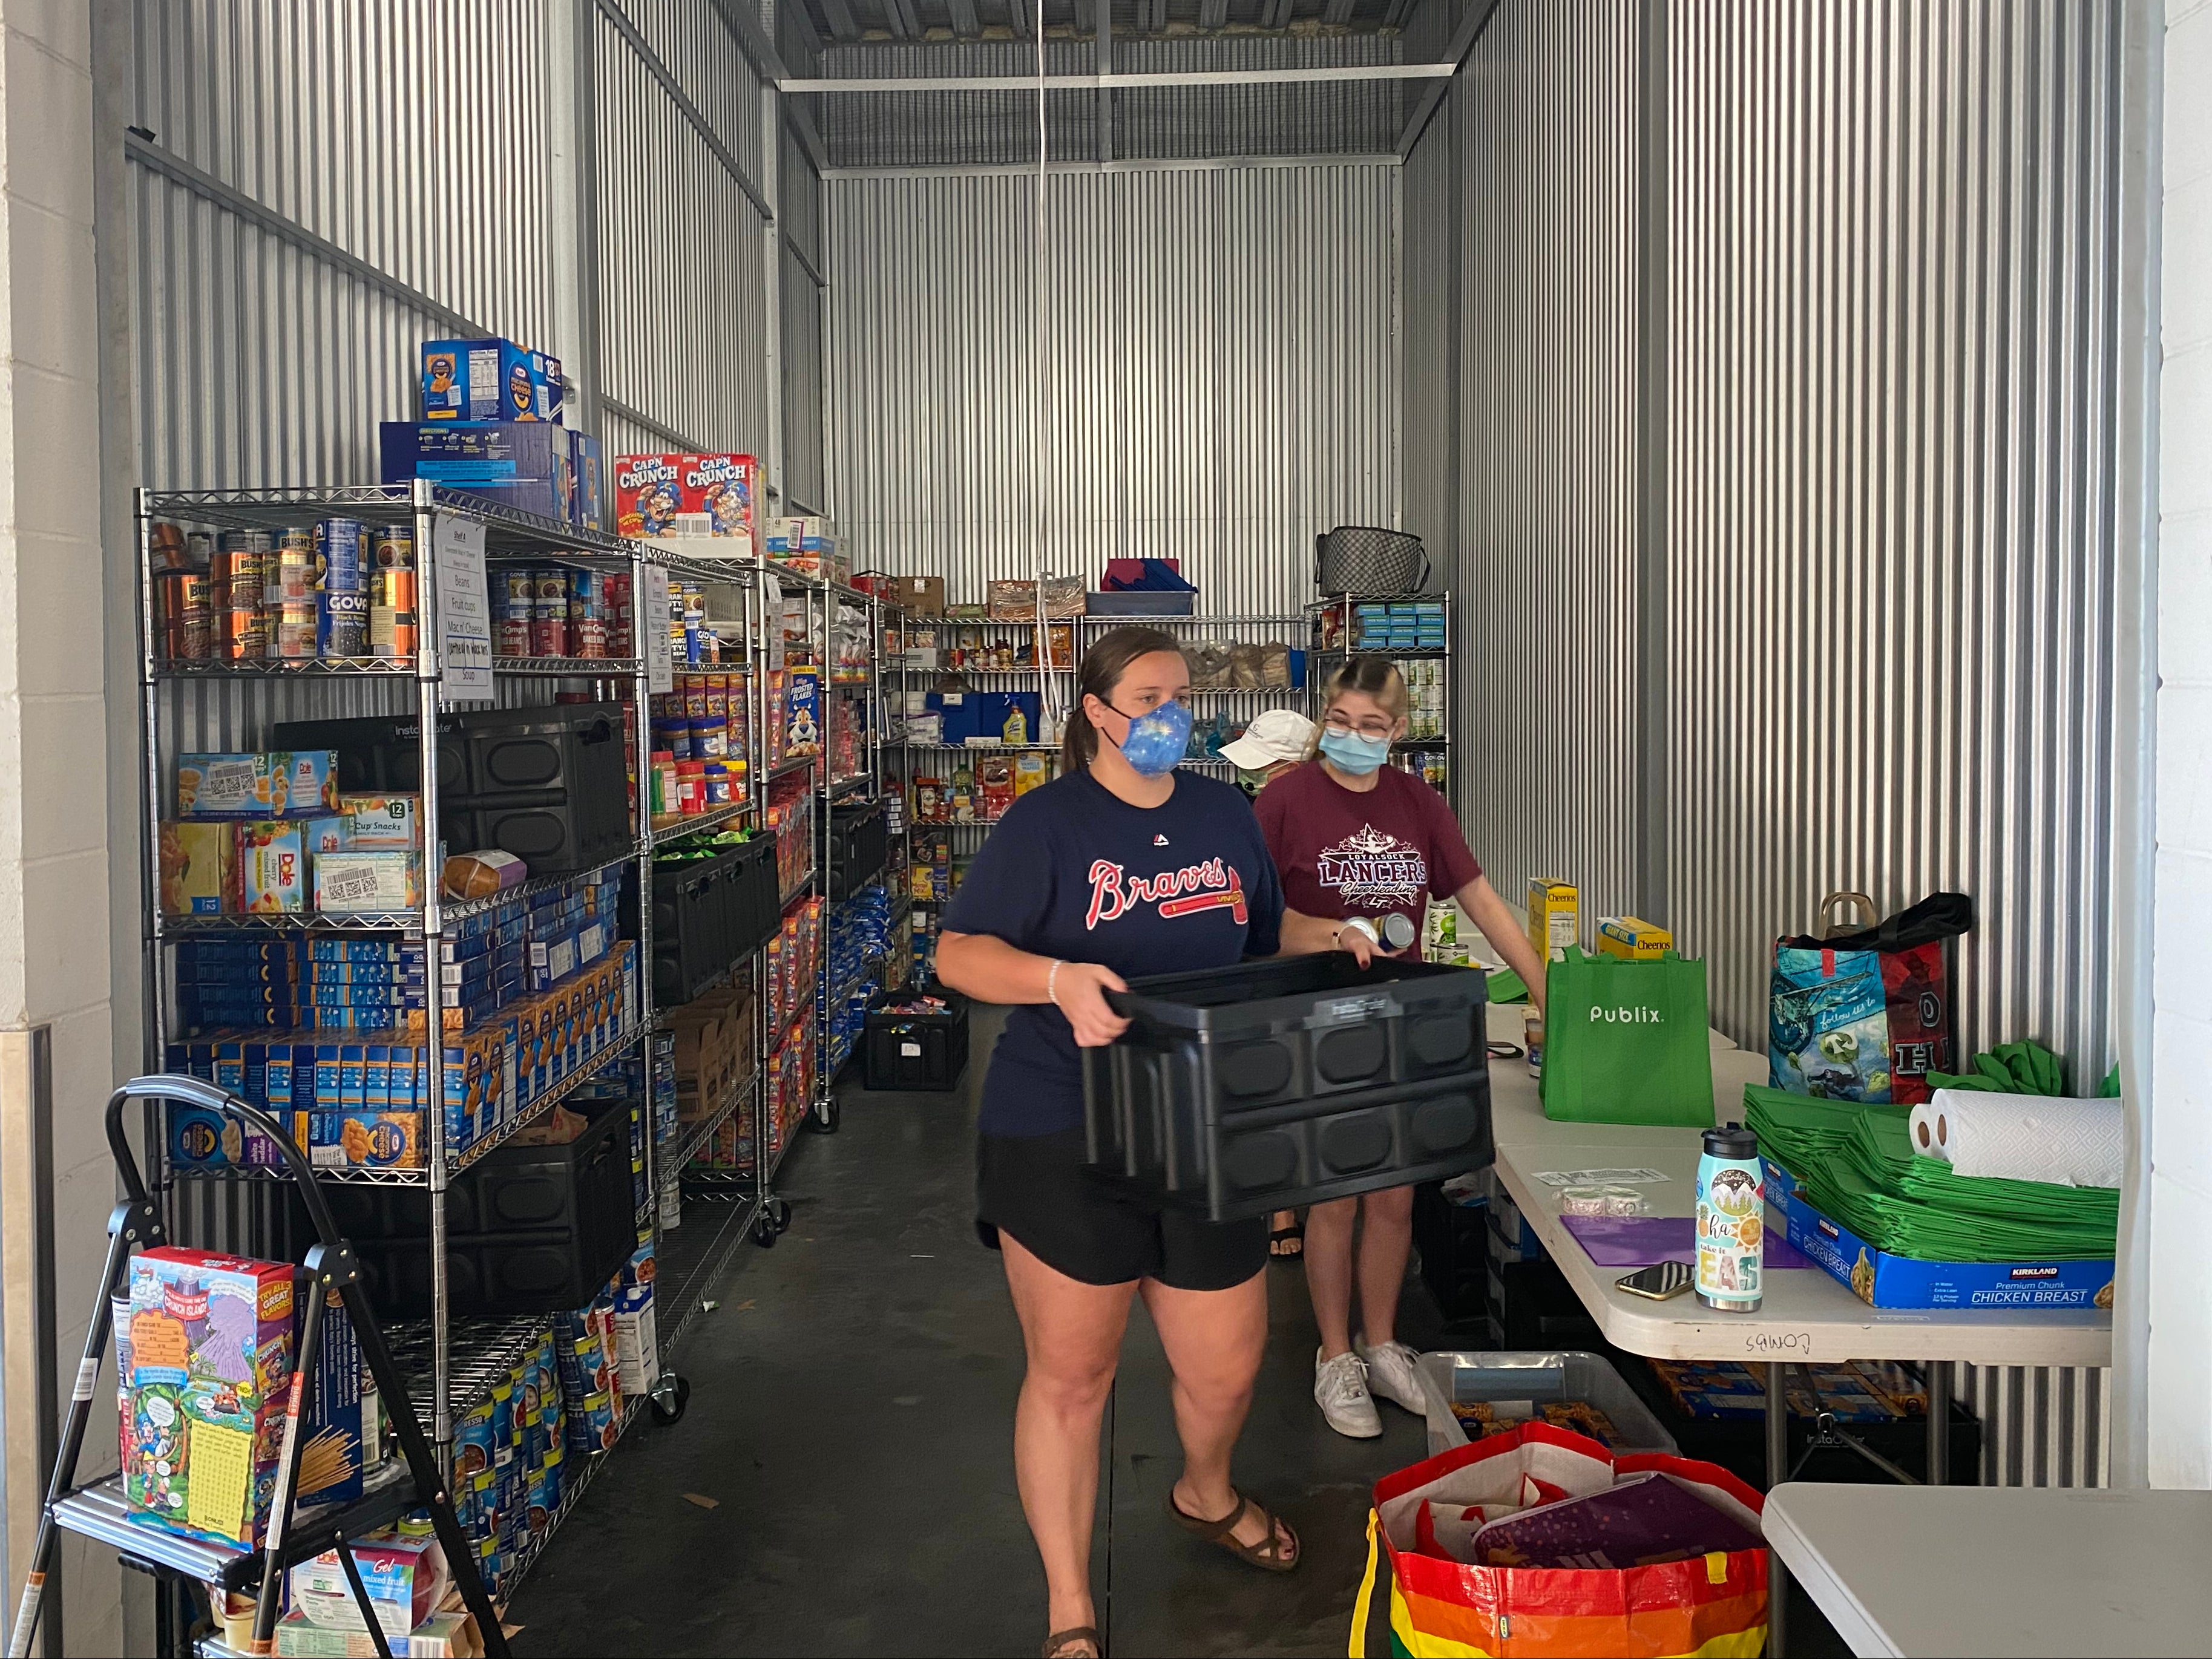 Emily Lartigue started a food bank for Disney employees who have been laid-off or furloughed during the pandemic.